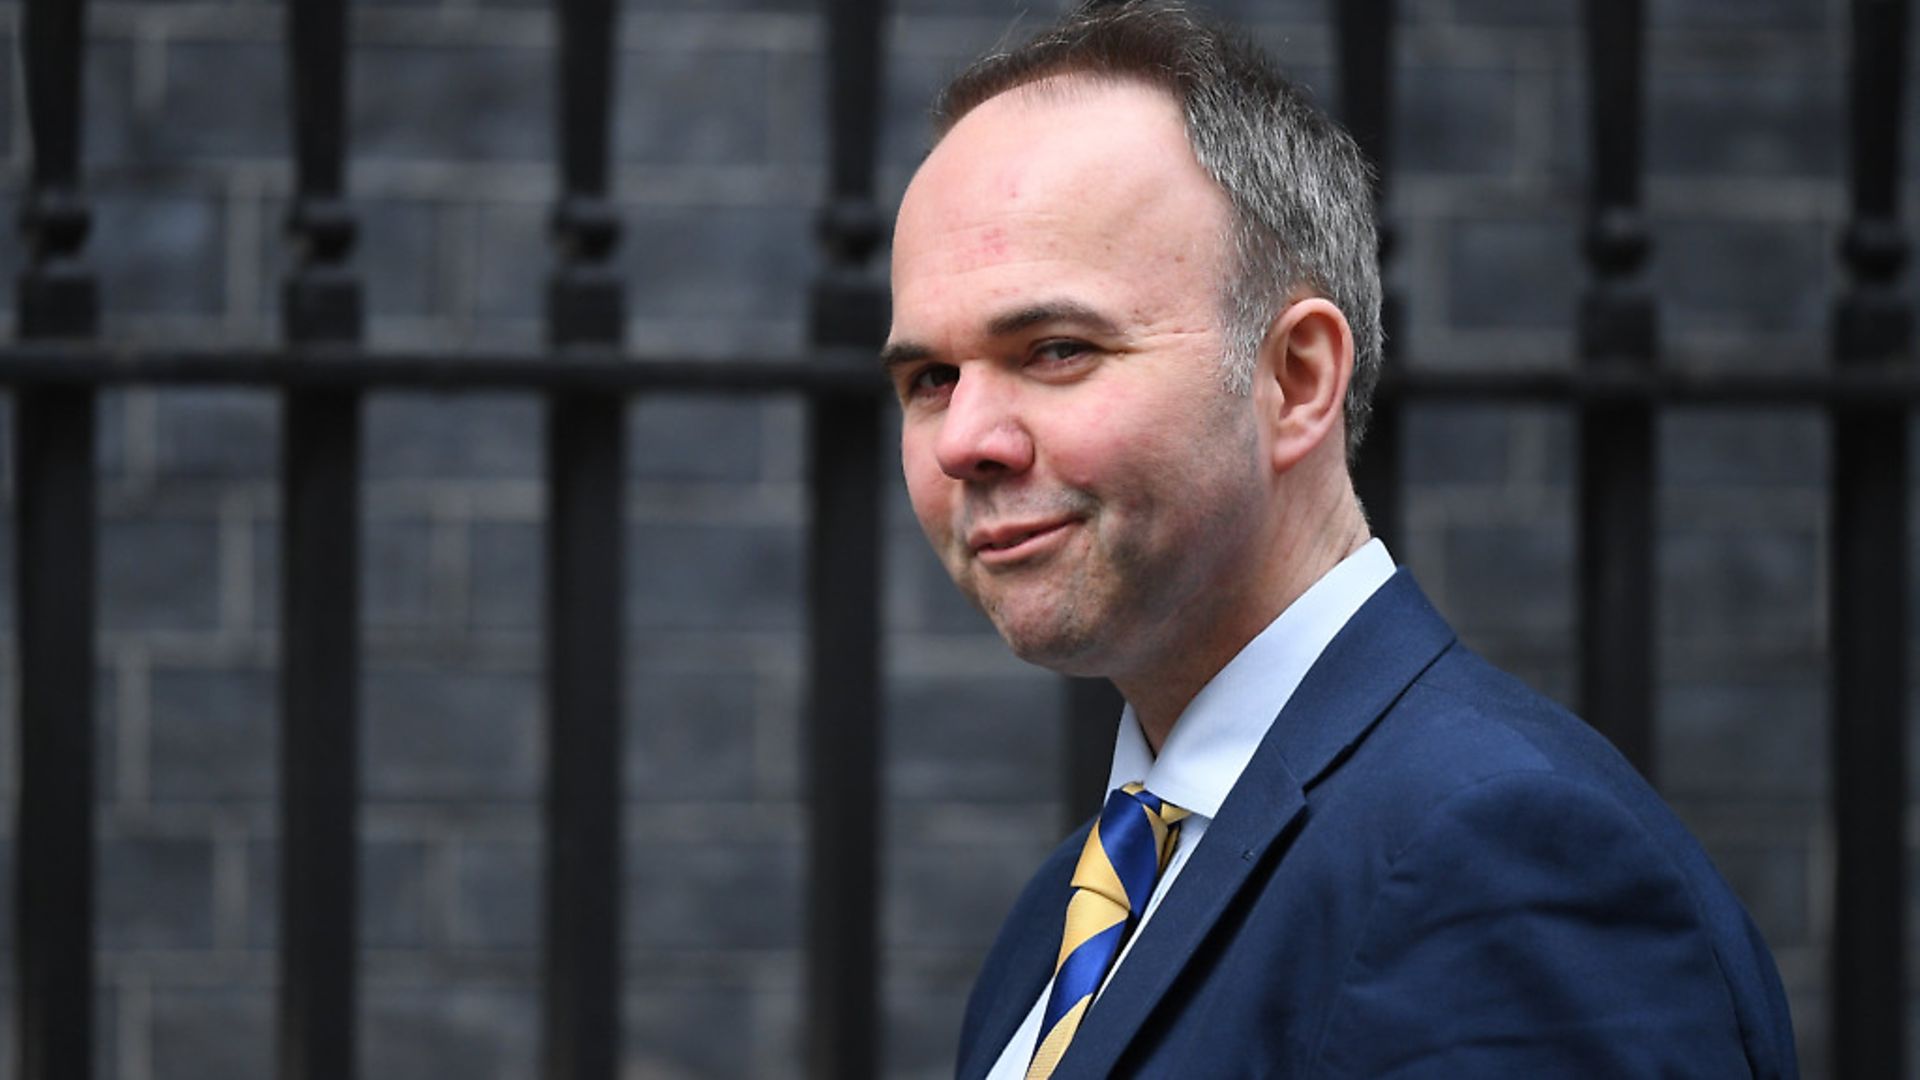 Gavin Barwell arrives at Downing Street in early 2019.  Photo by Leon Neal/Getty Images. - Credit: Getty Images